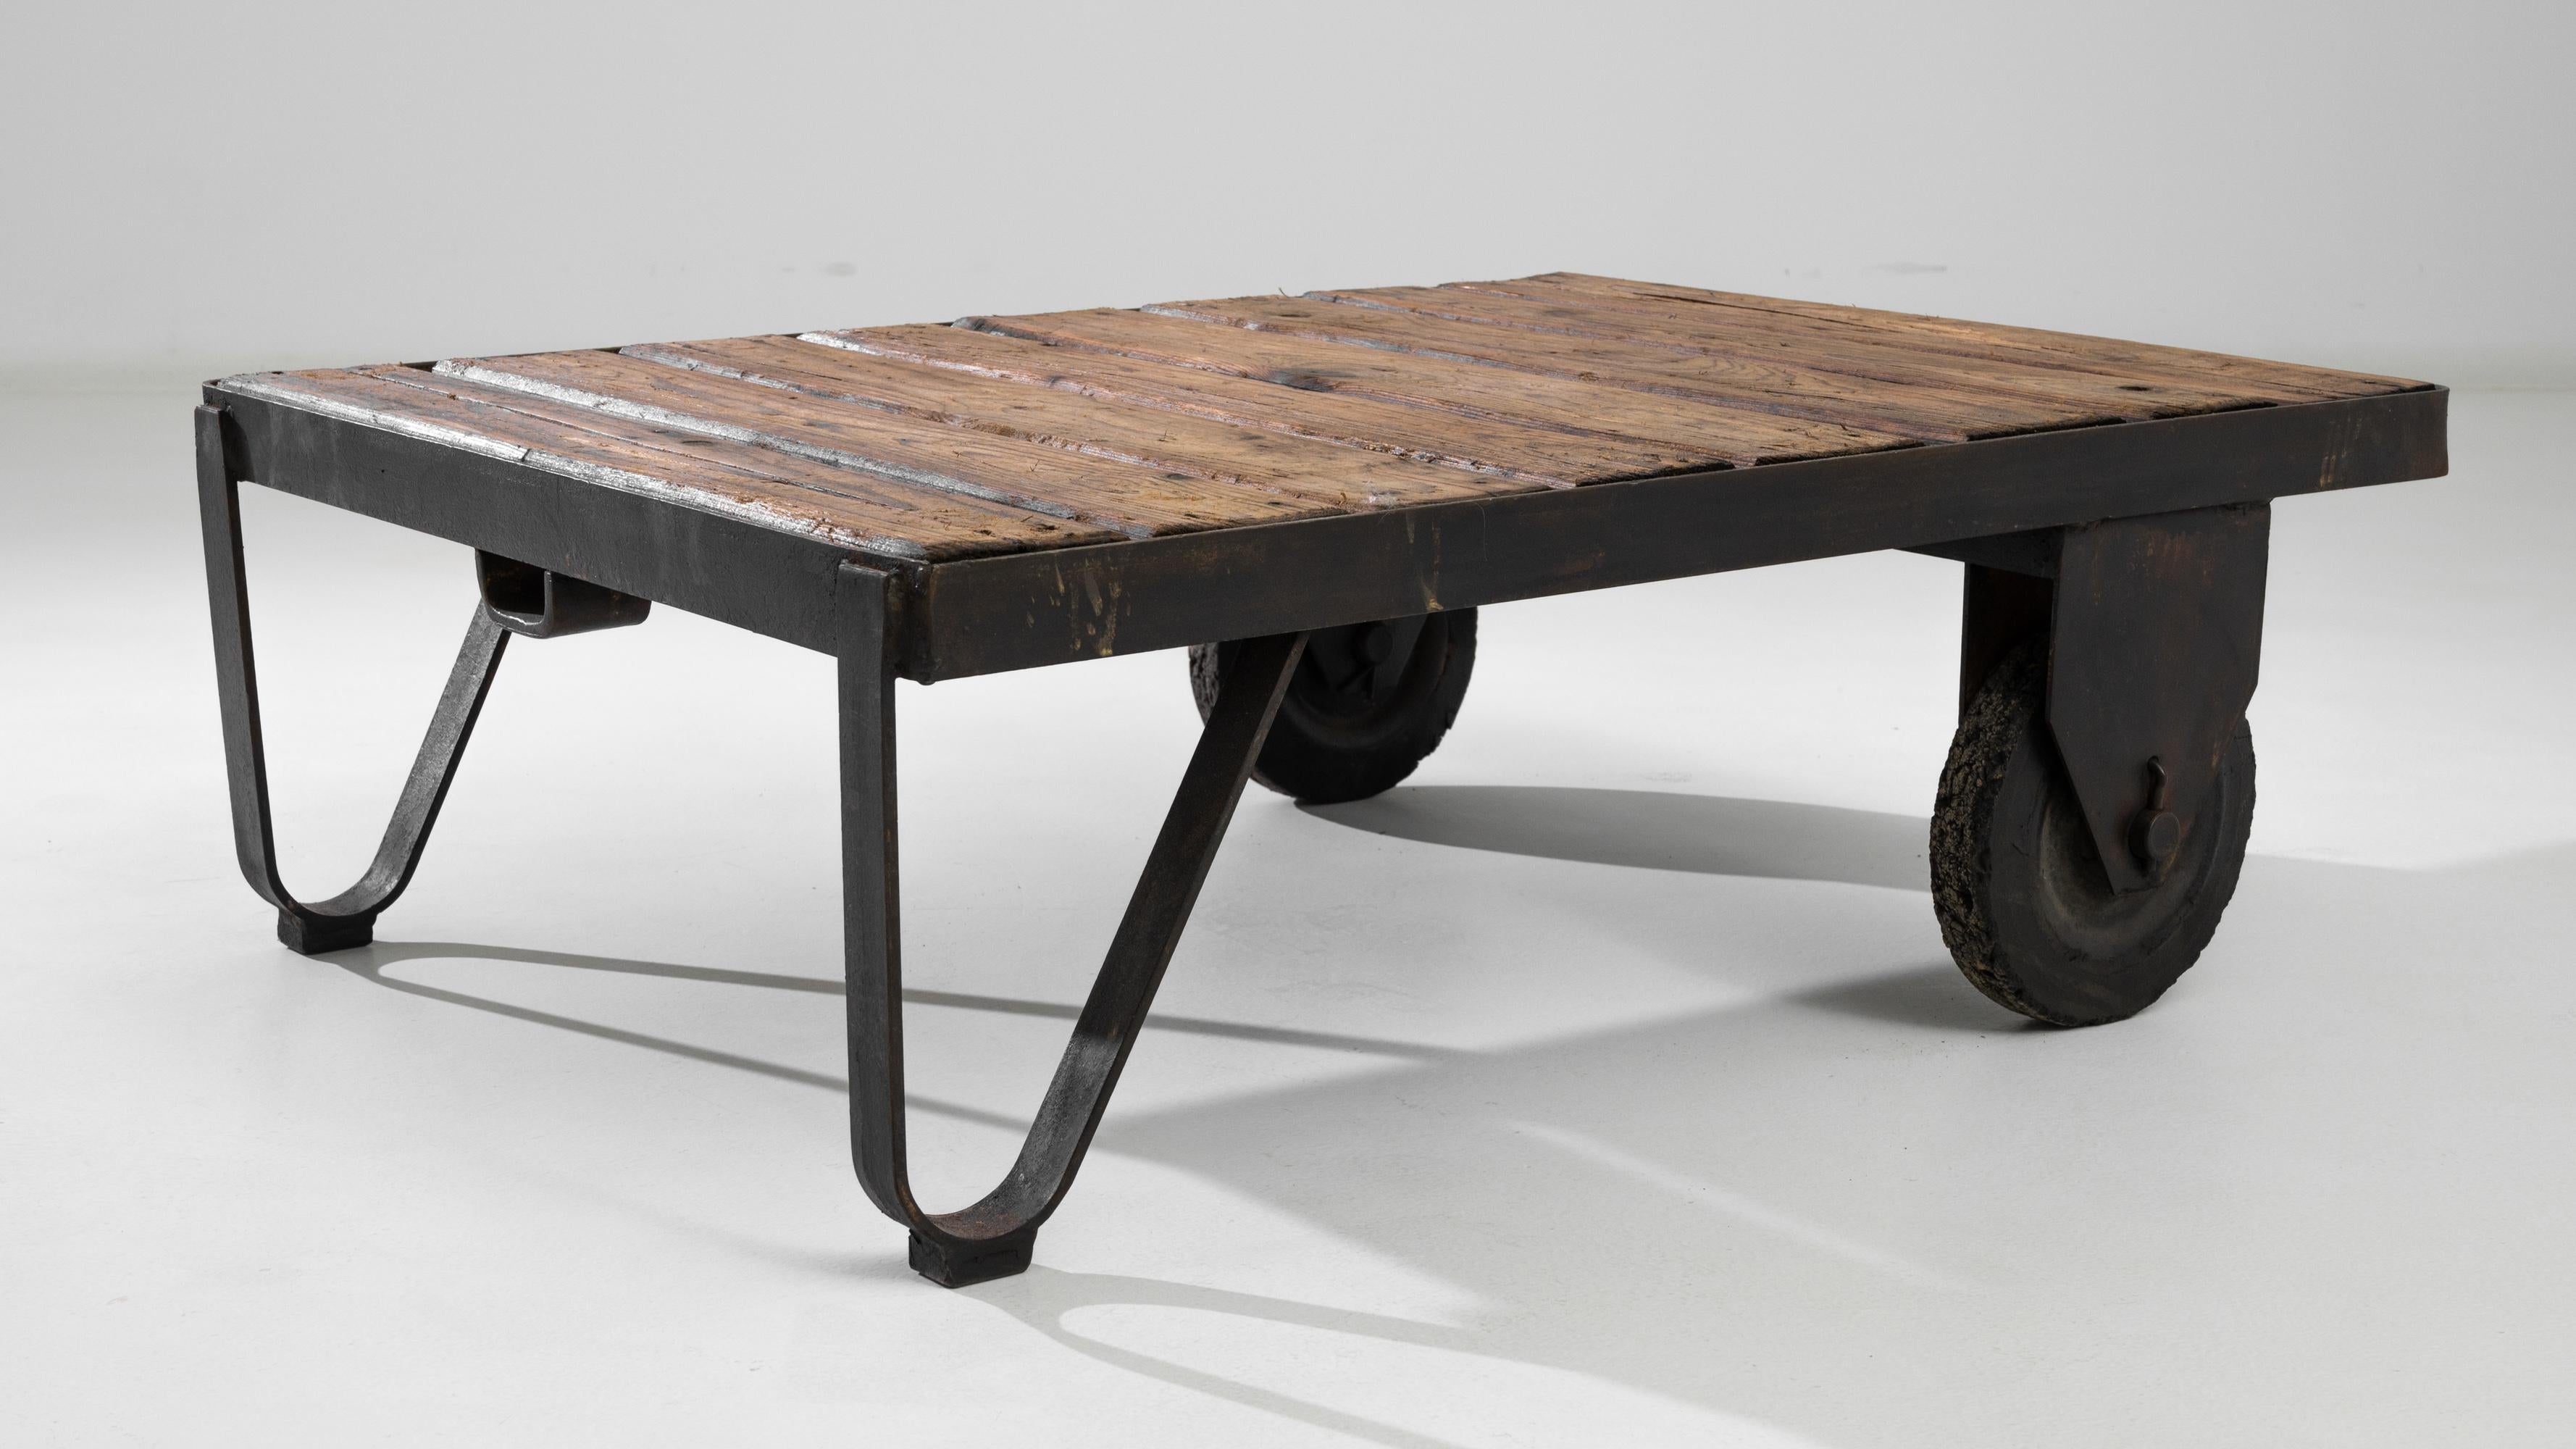 Metal Antique Central European Industrial Cart Coffee Table